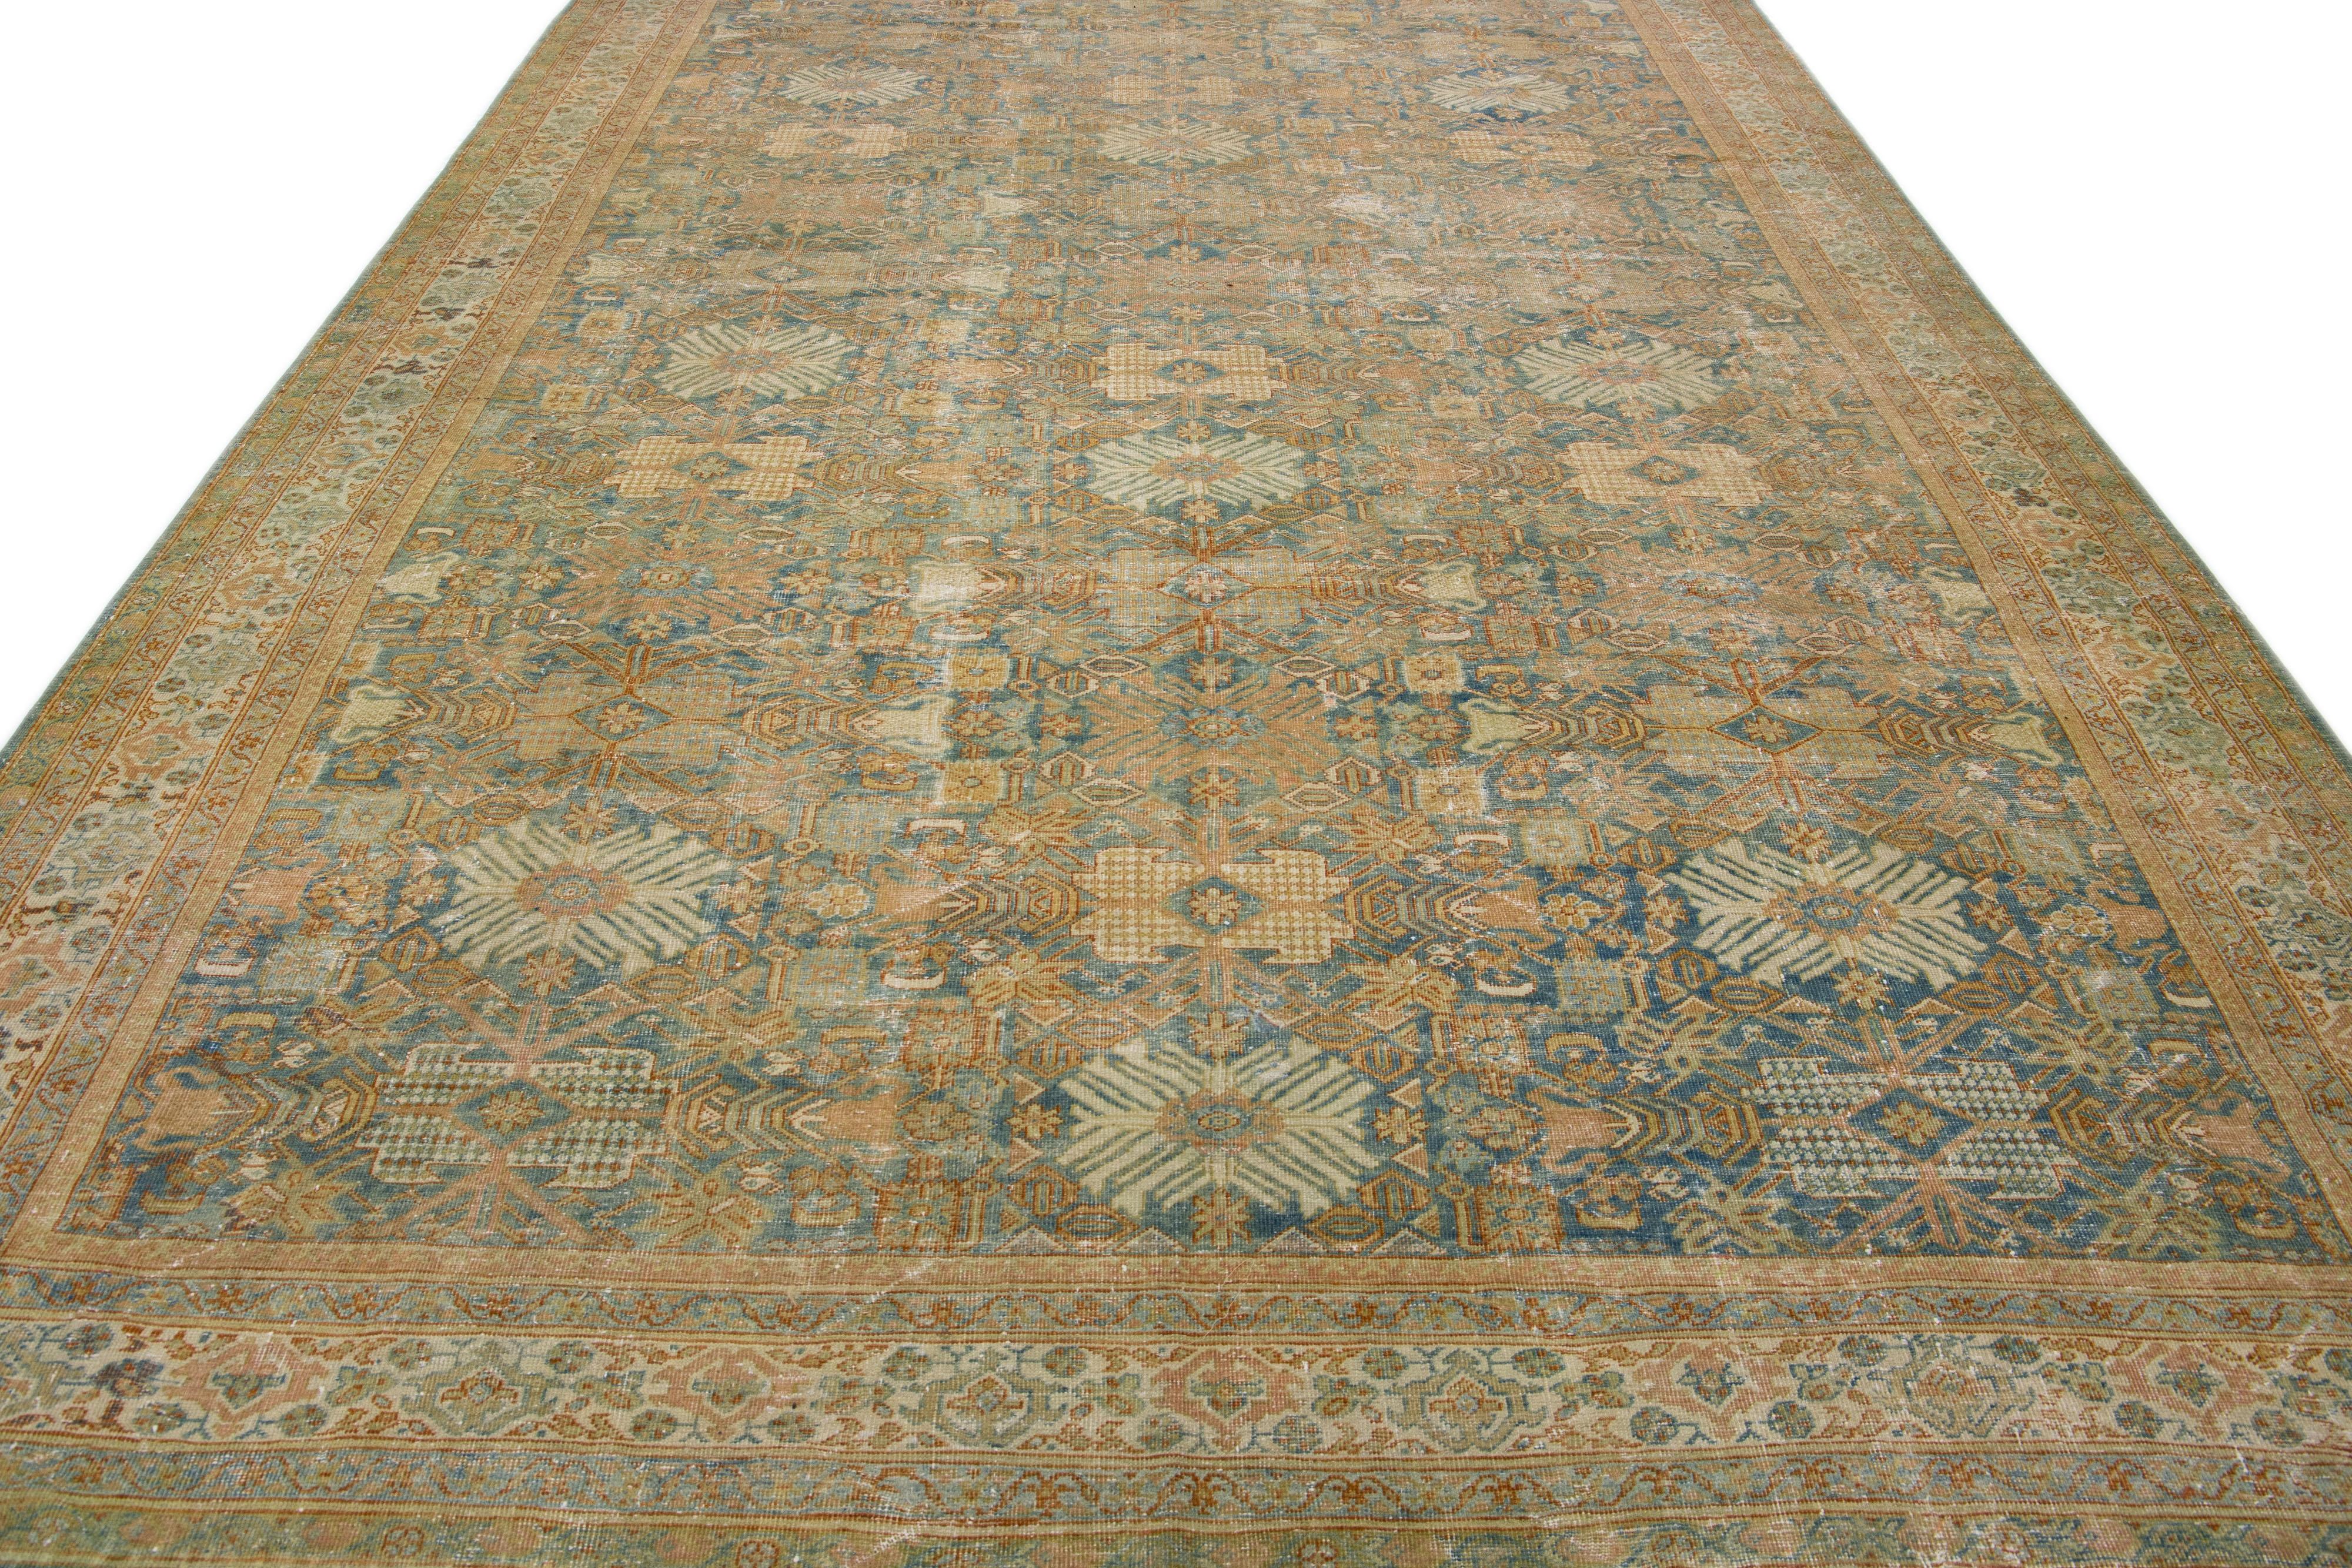 Islamic Antique Persian Mahal Orange & Blue Handmade Wool Rug with Floral Design For Sale